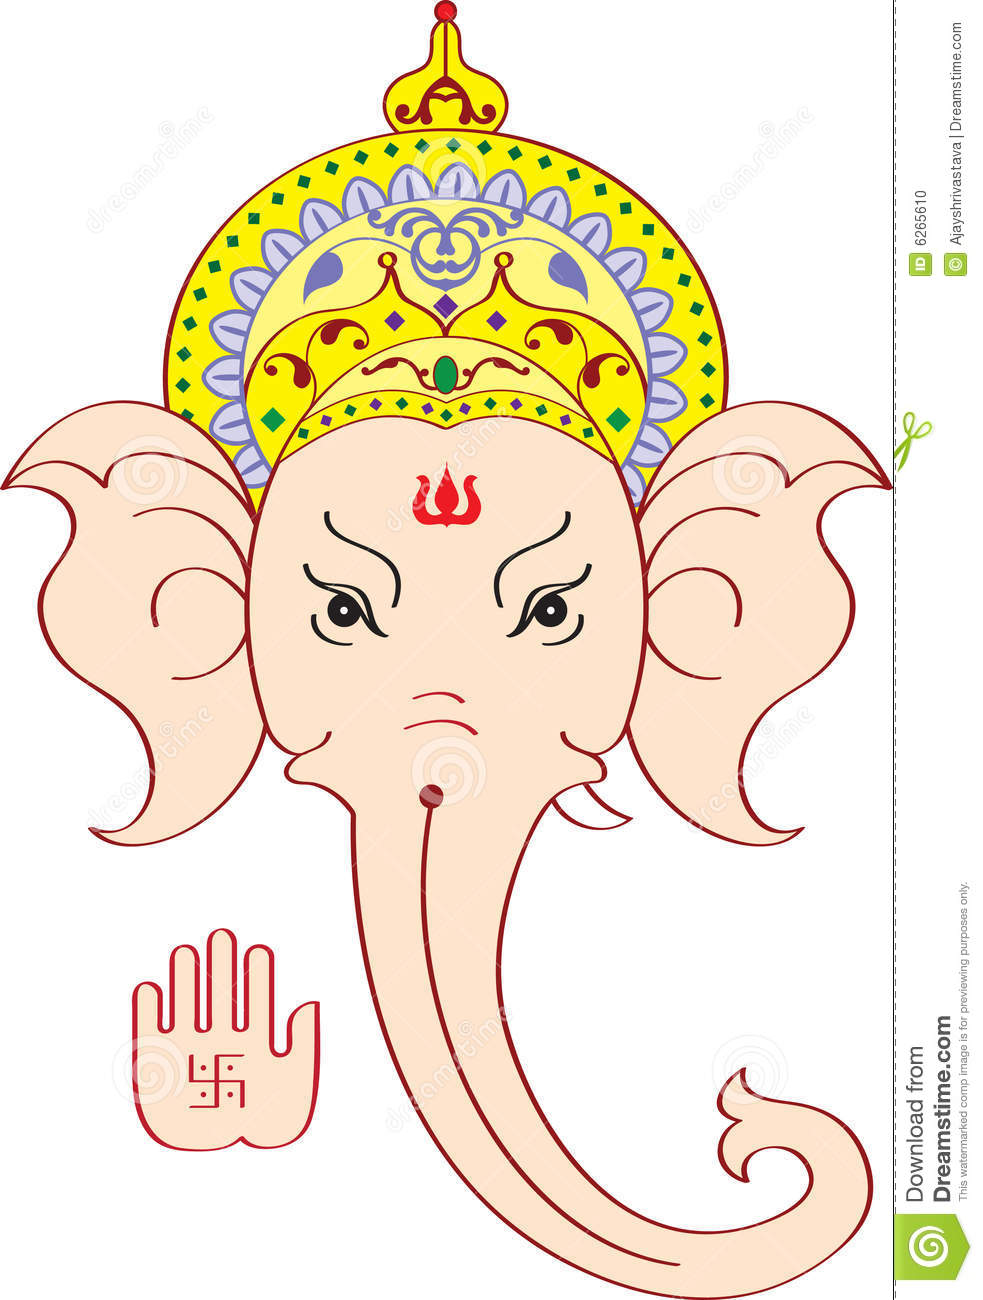 Ganesh Face Giving Blessing Stock Photo   Image  6265610